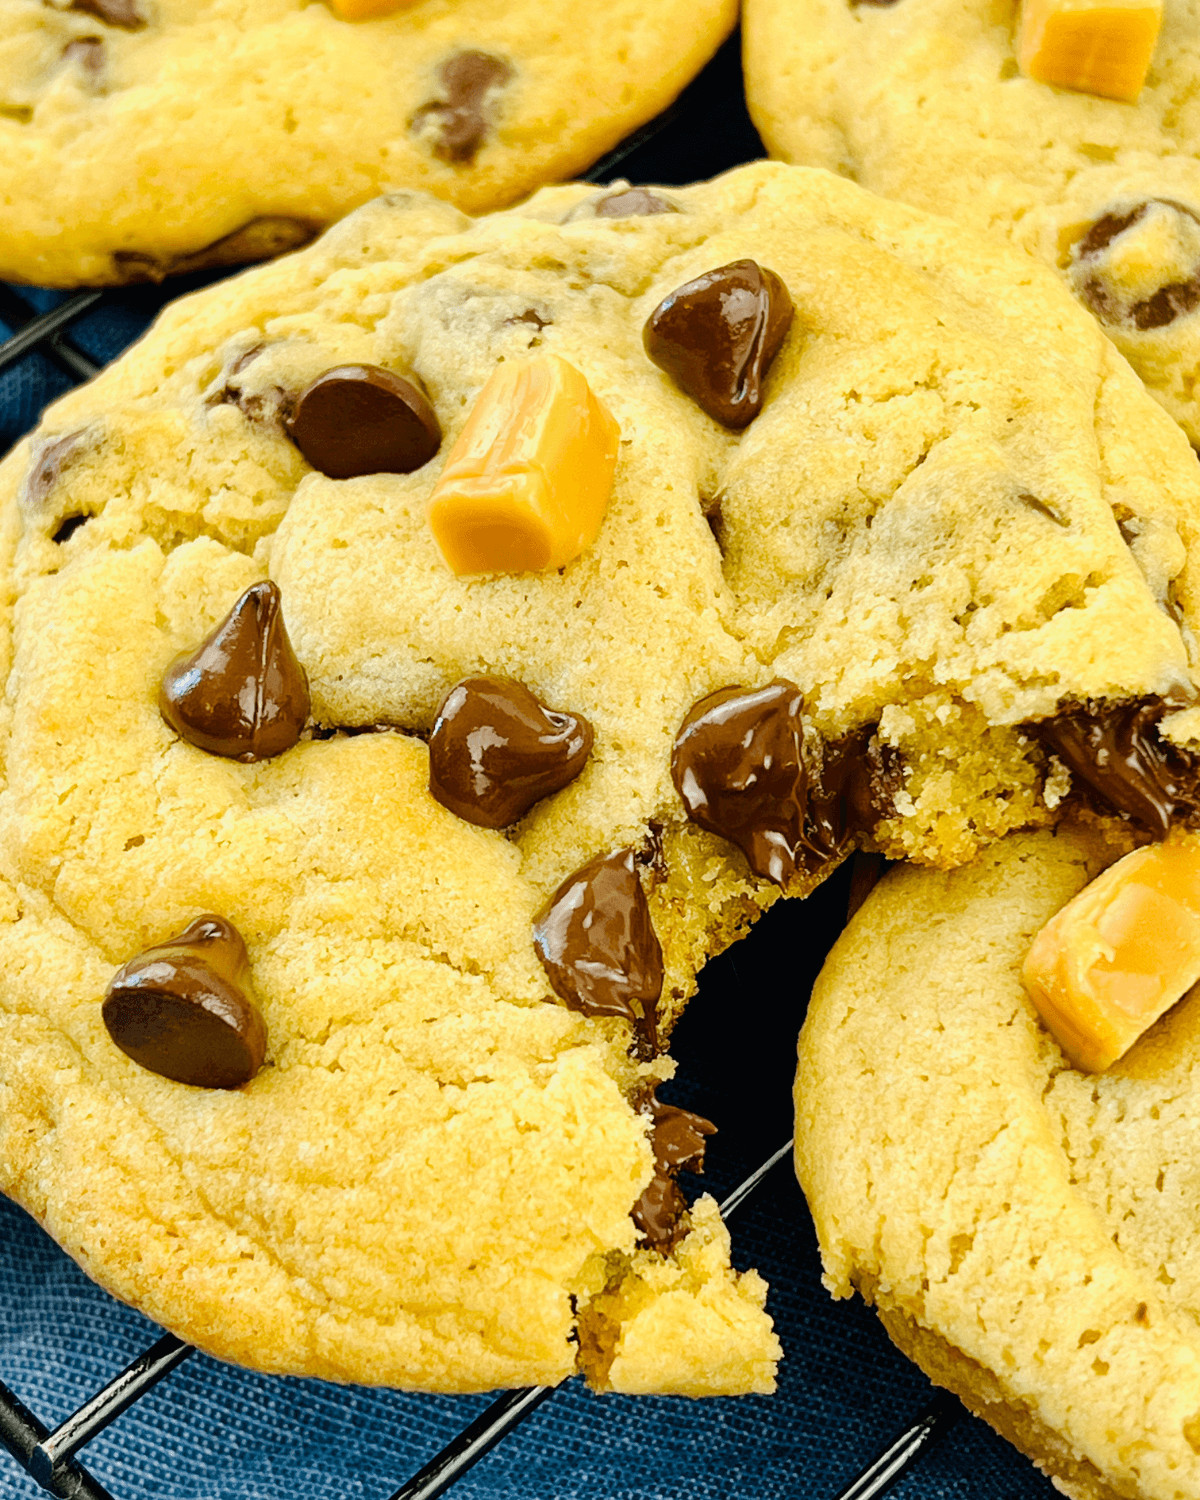 A Caramel Chocolate Chip Cookies with a bite taken out.